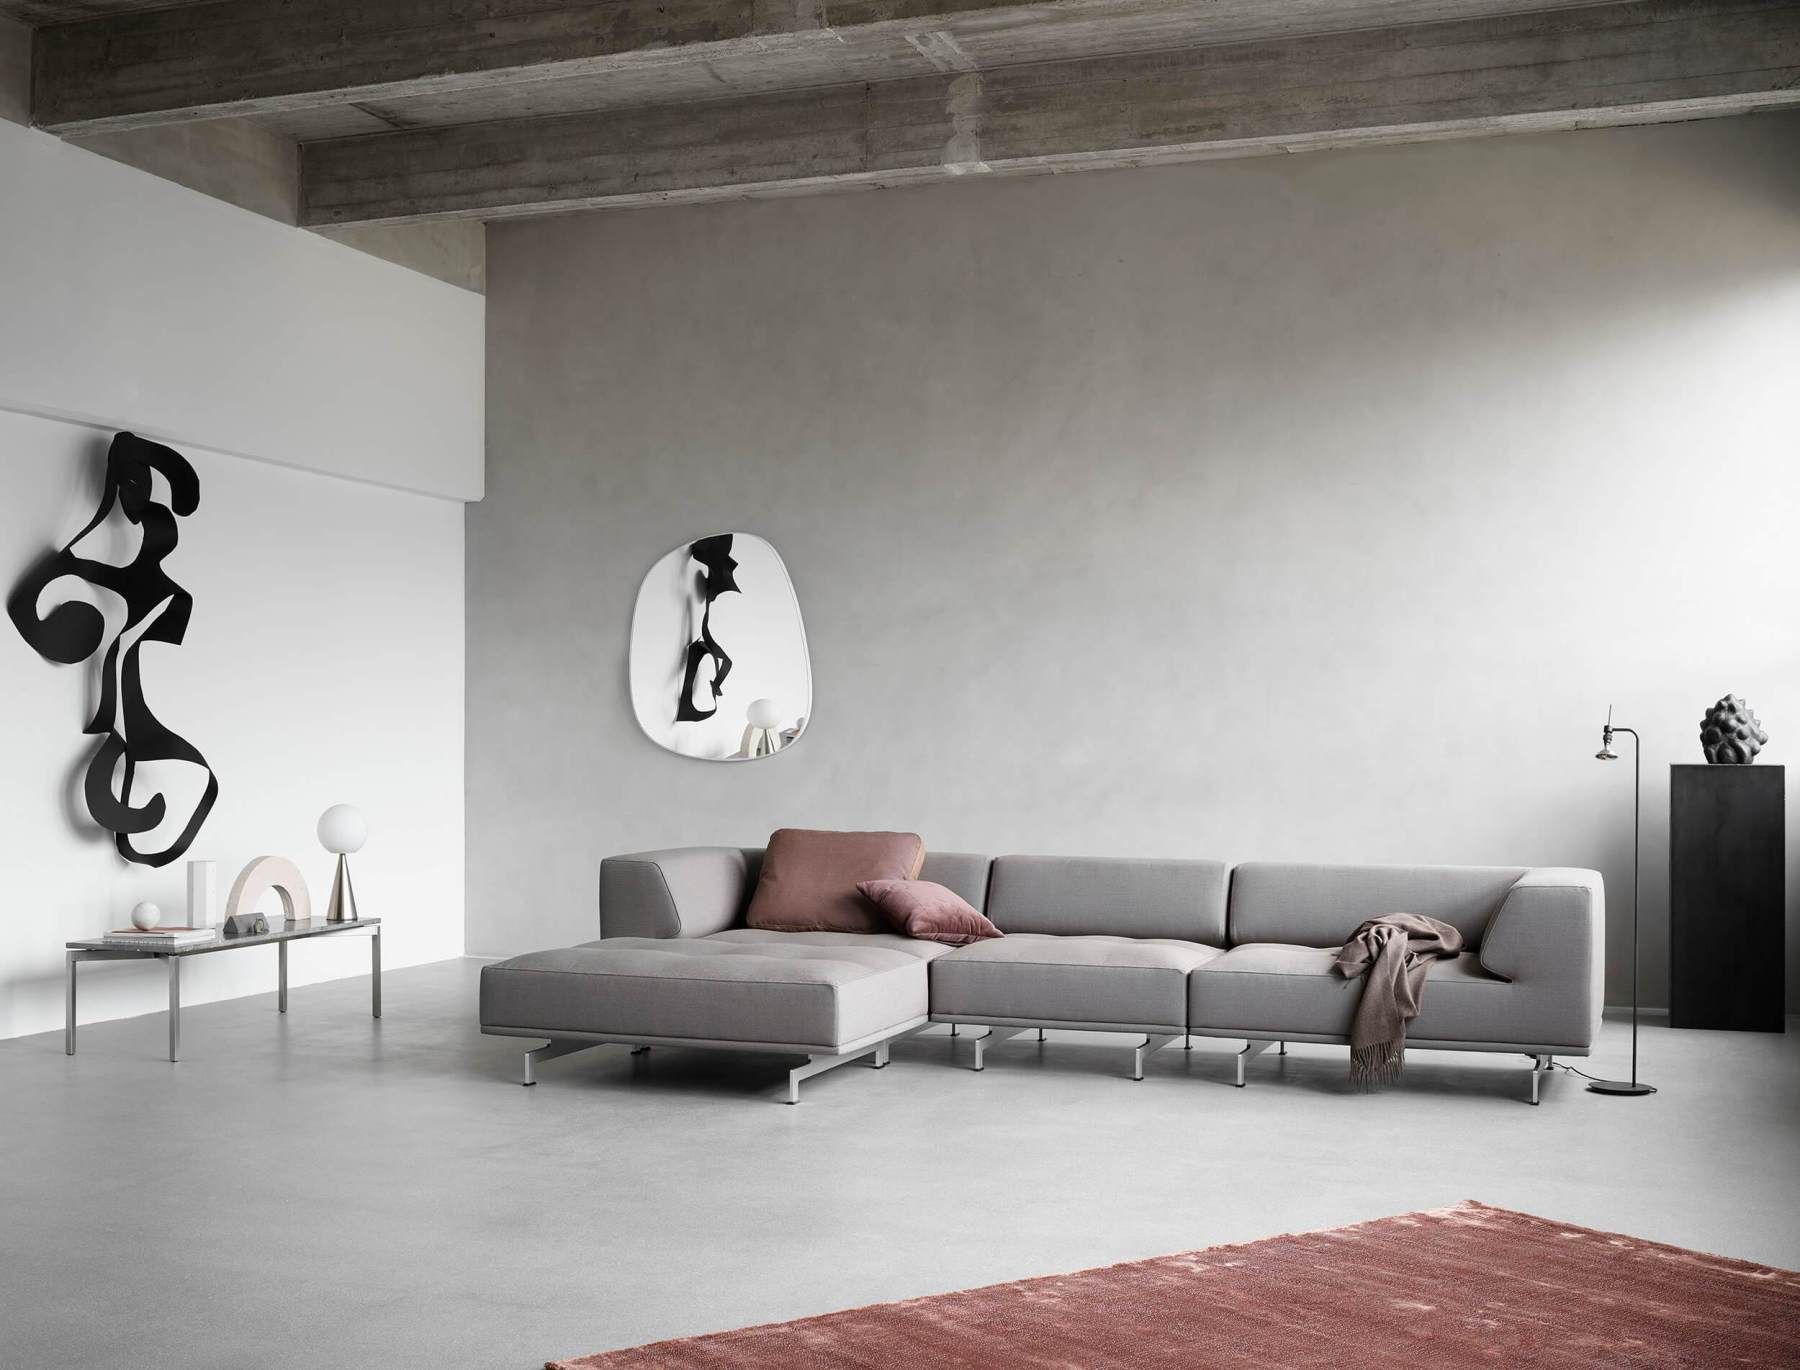 Sofa Mirror Wall: A Reflection Of Style And Functionality